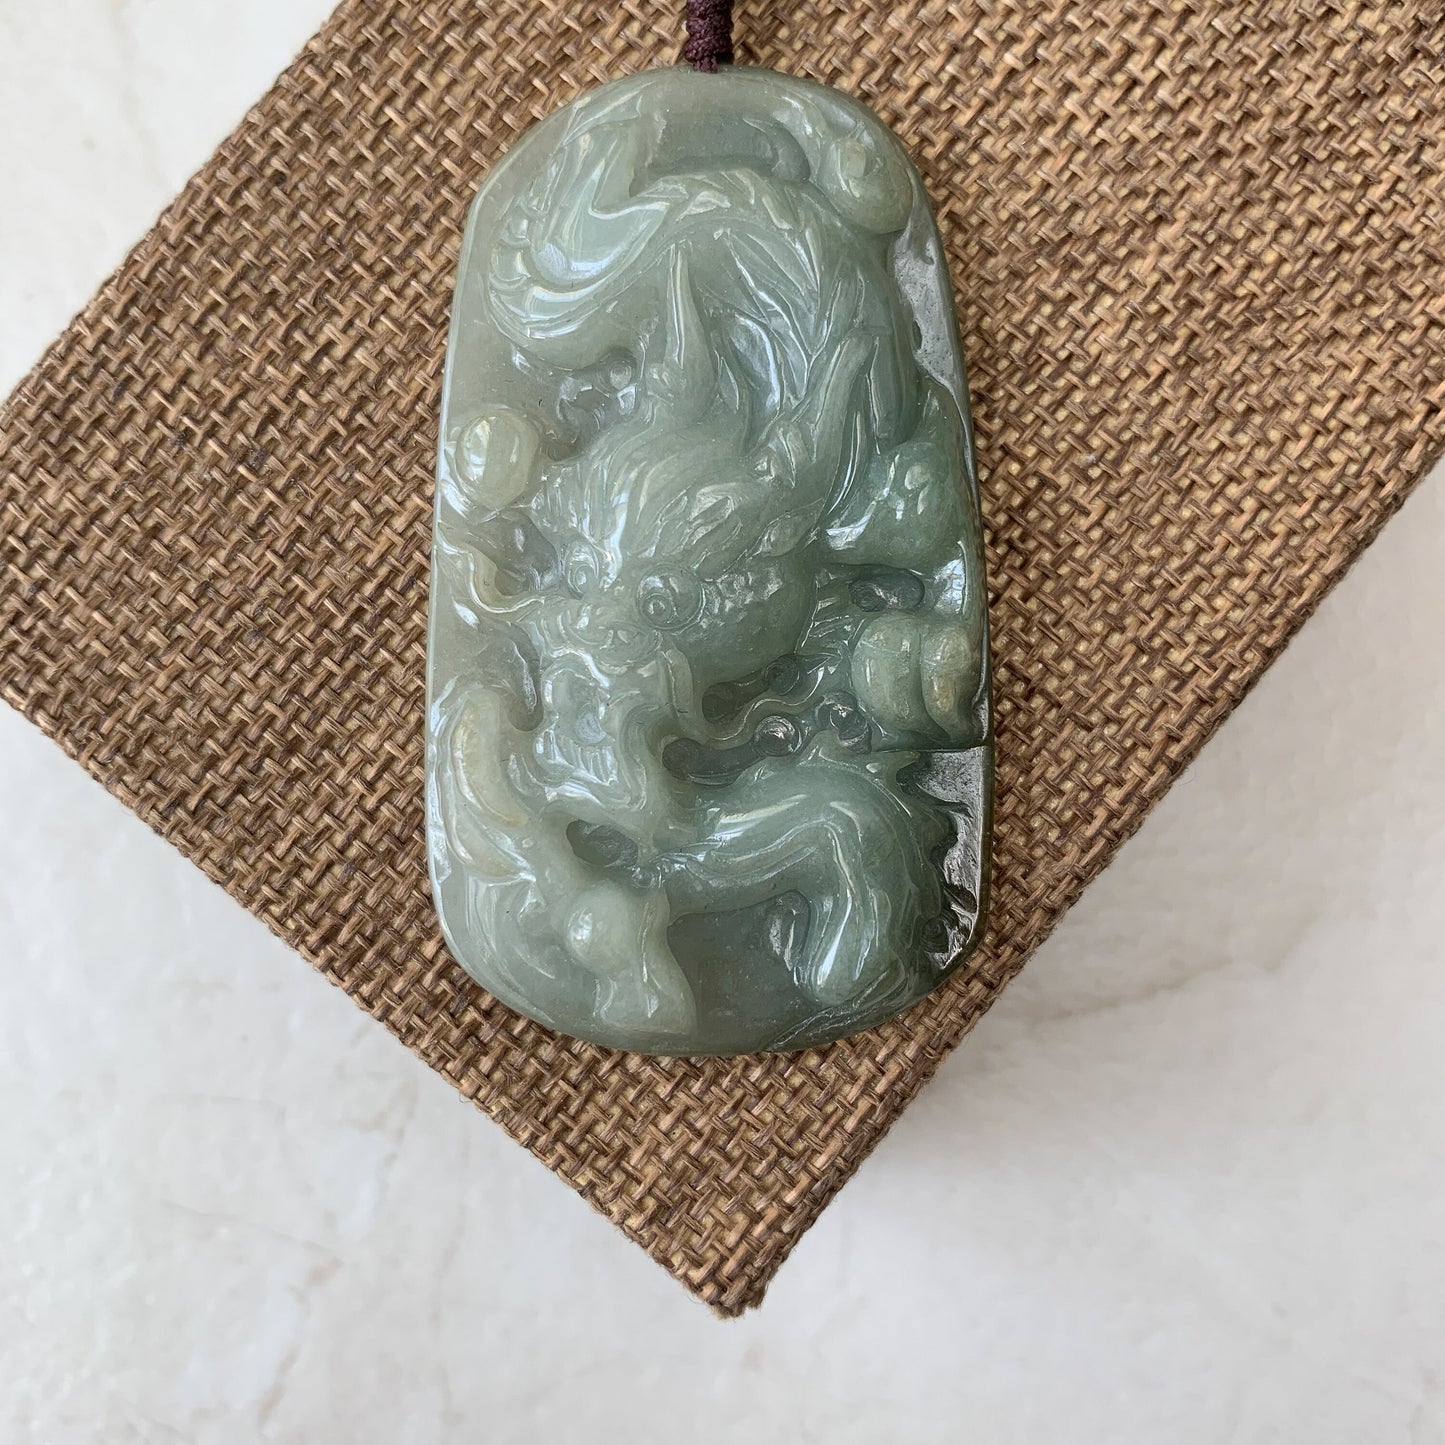 Jadeite Jade Dragon Chinese Zodiac Hand Carved Pendant Necklace, YJ-0321-0470386 - AriaDesignCollection